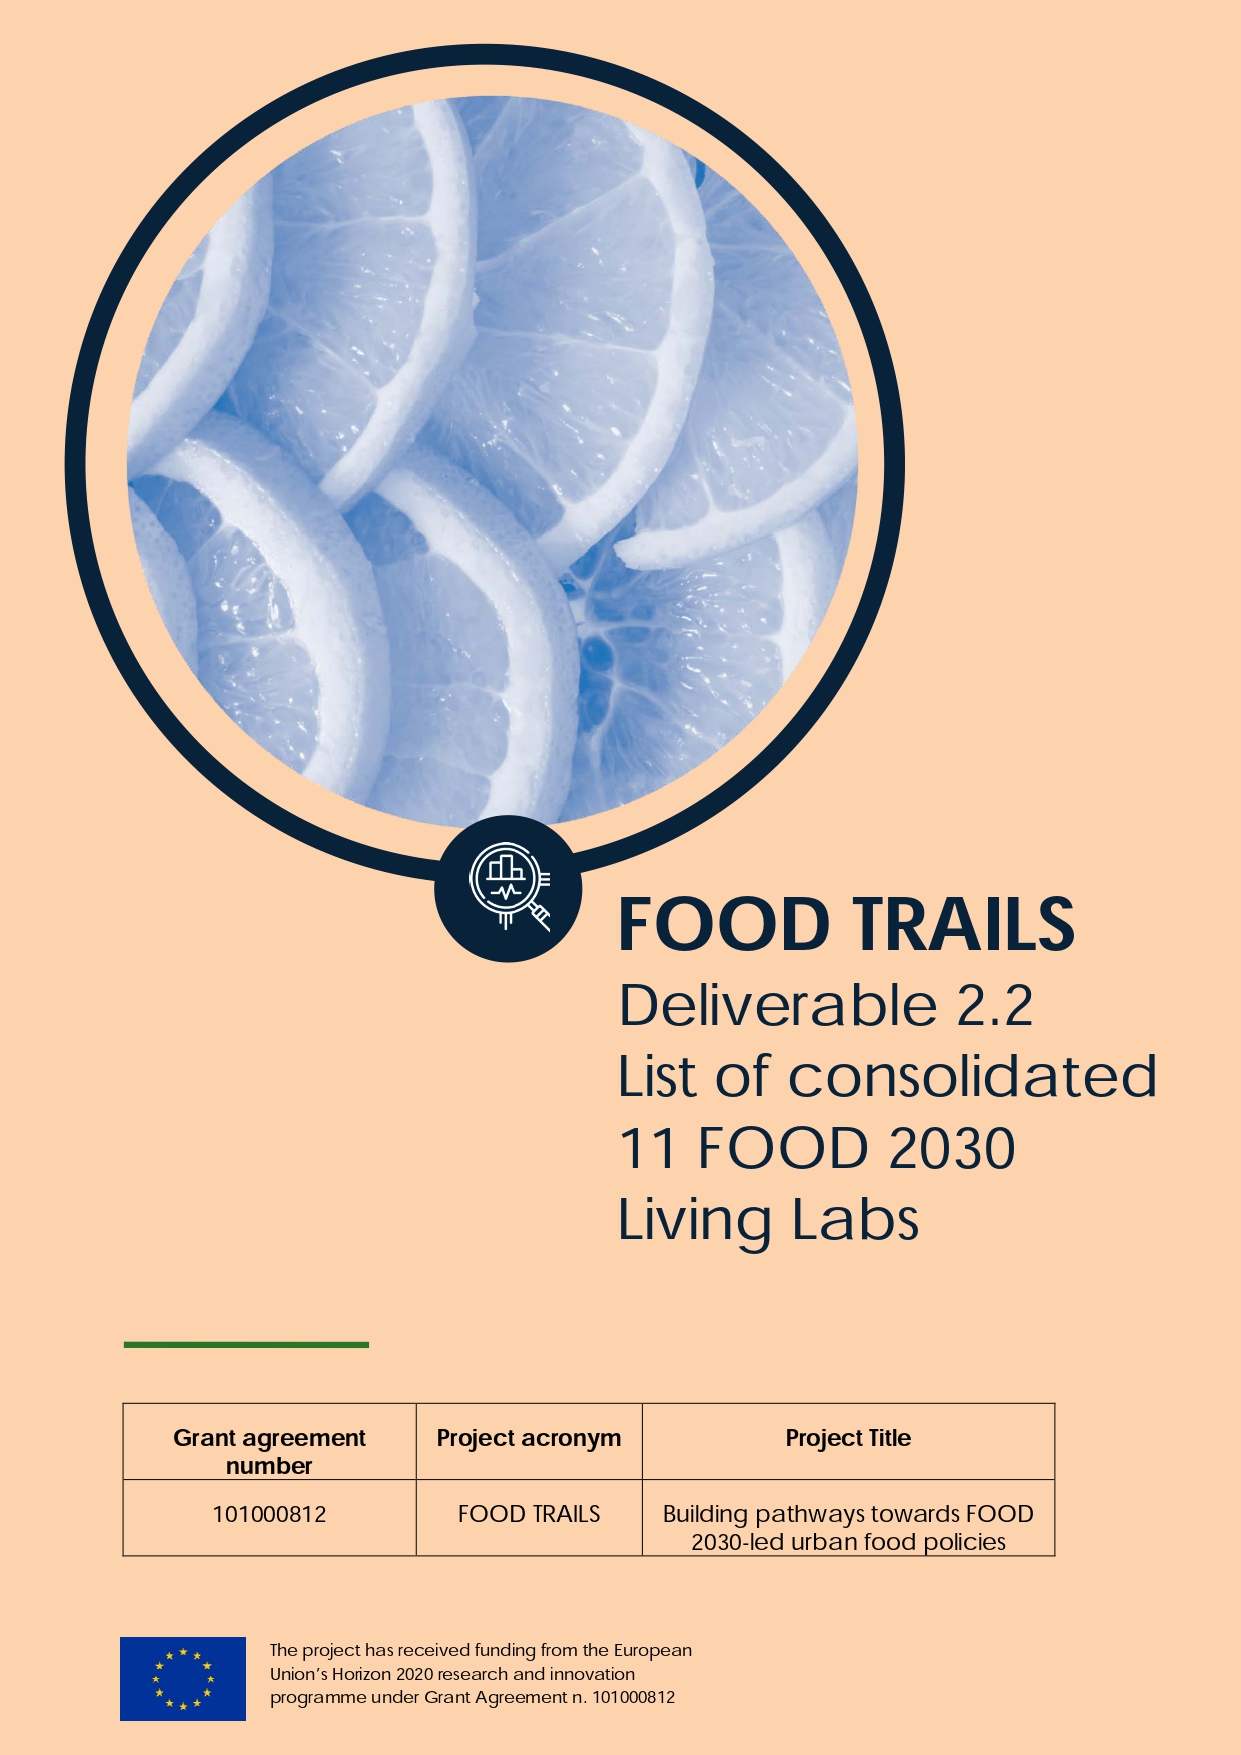 List of consolidated 11 FOOD 2030 Living Lab